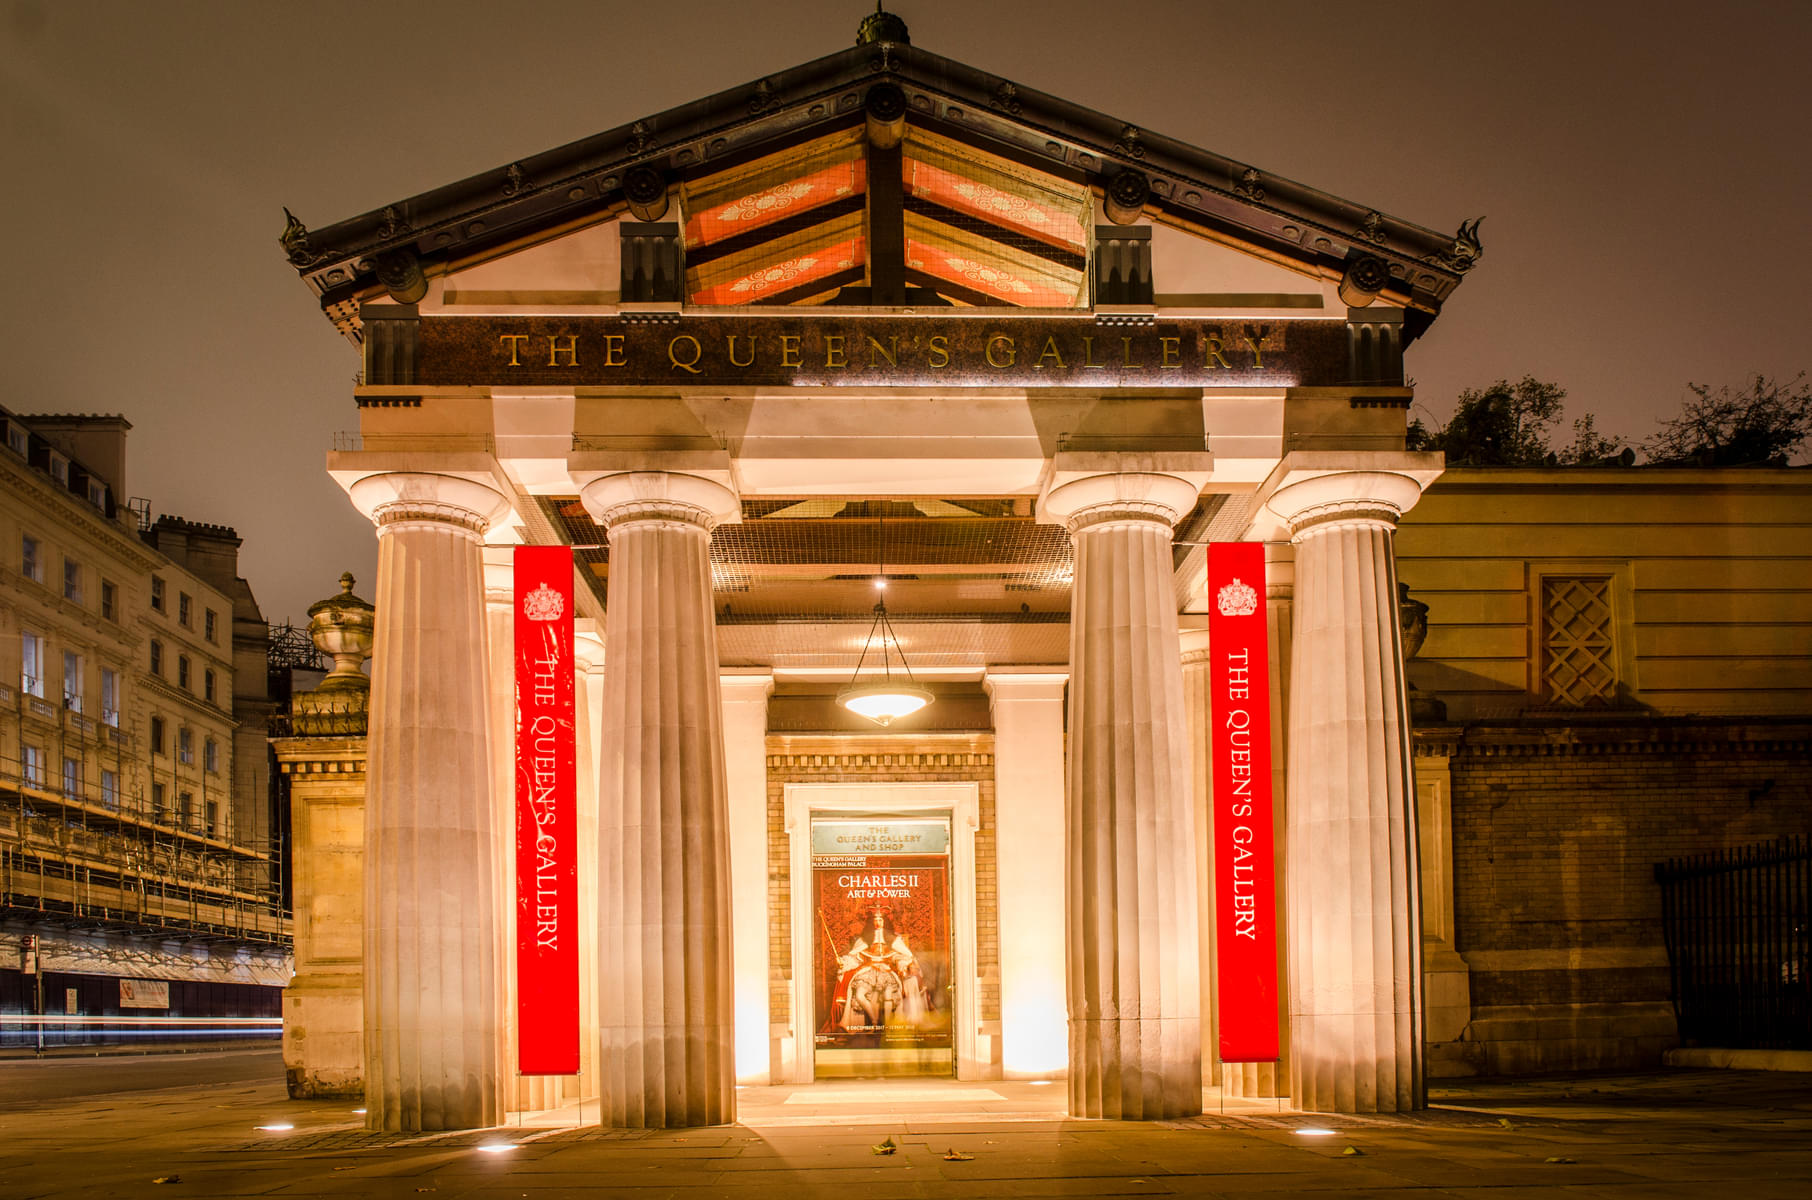 Admire the artworks at Queen's Gallery